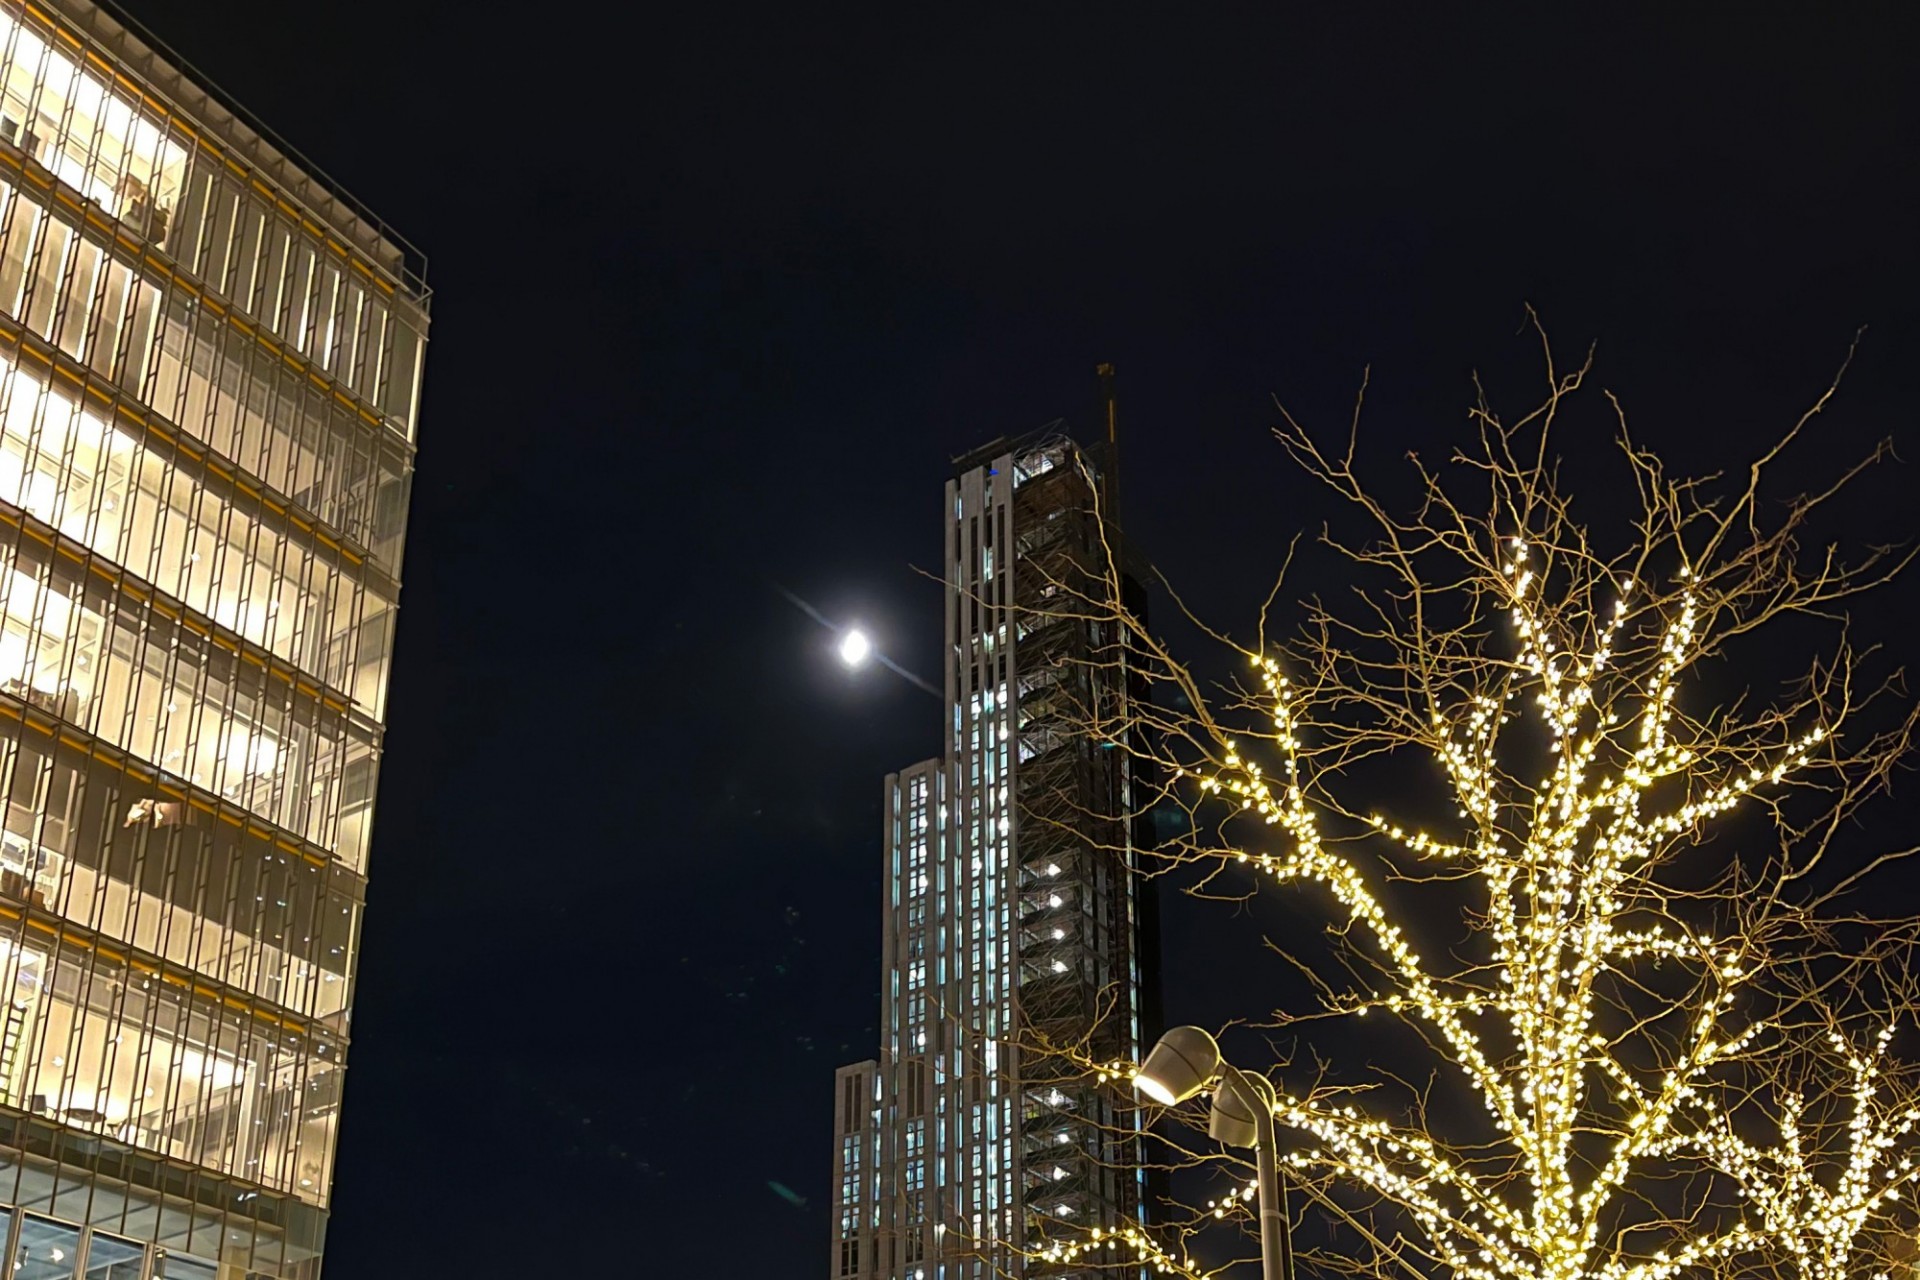 A view of 600 W. 125th Street during nighttime, with illuminated trees and Jerome L. Greene Science Center in the foreground.